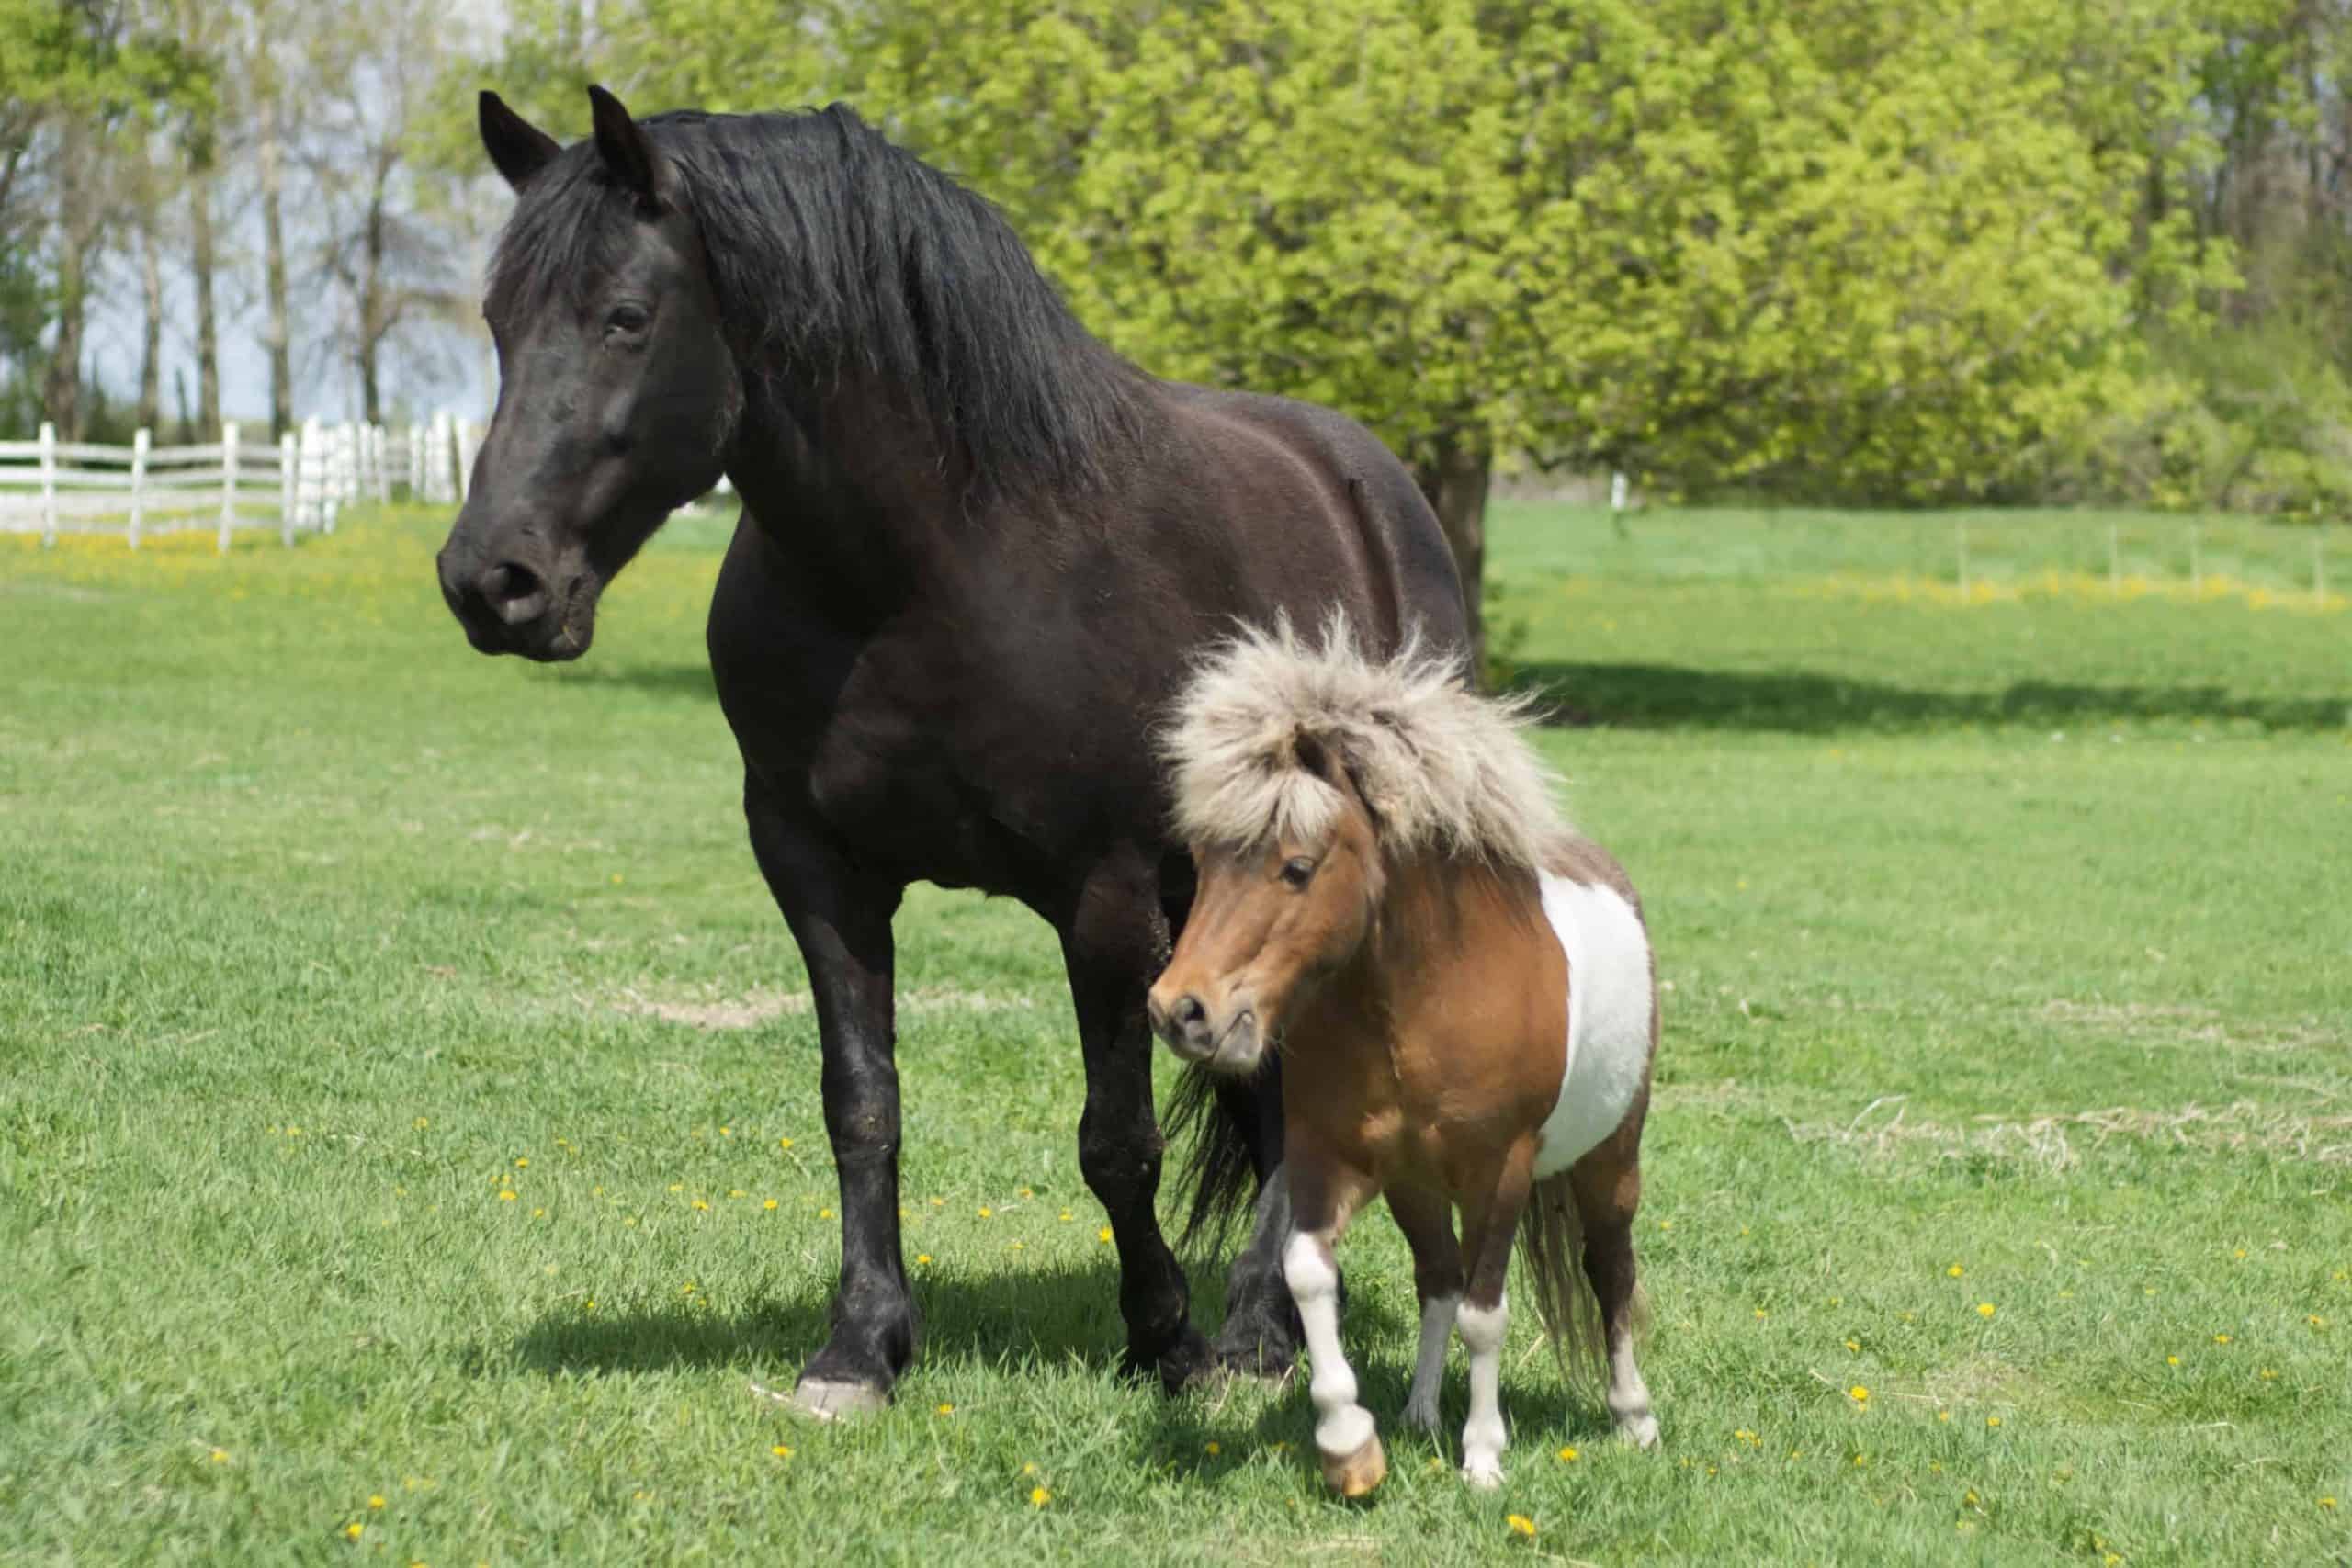 Big_horse_and_little_horse-scaled.jpg